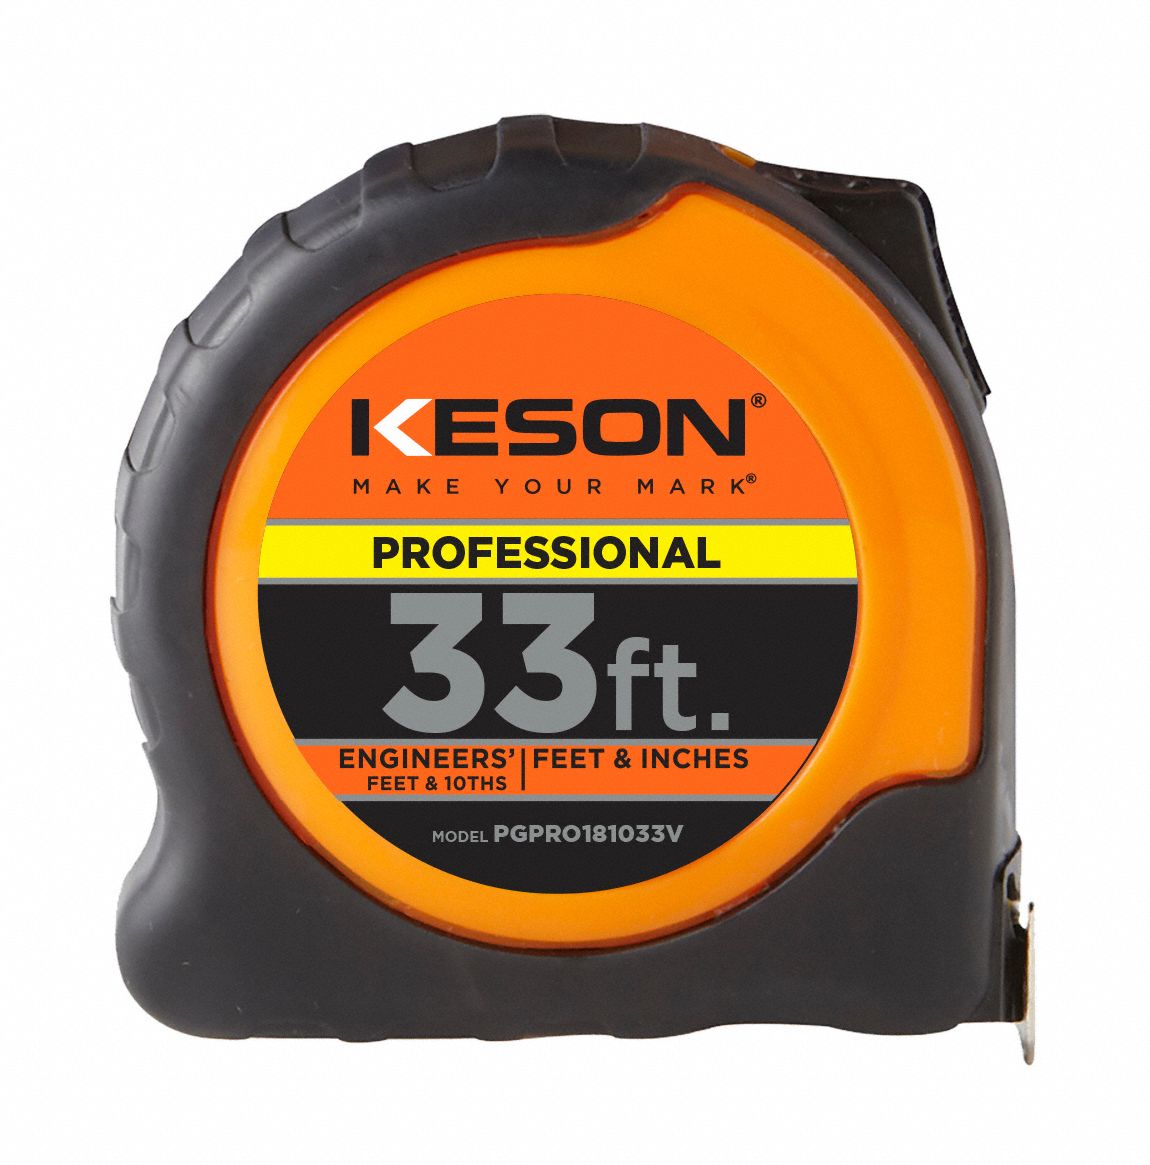 Keson 33ft Engineers and SAE Measuring Tape